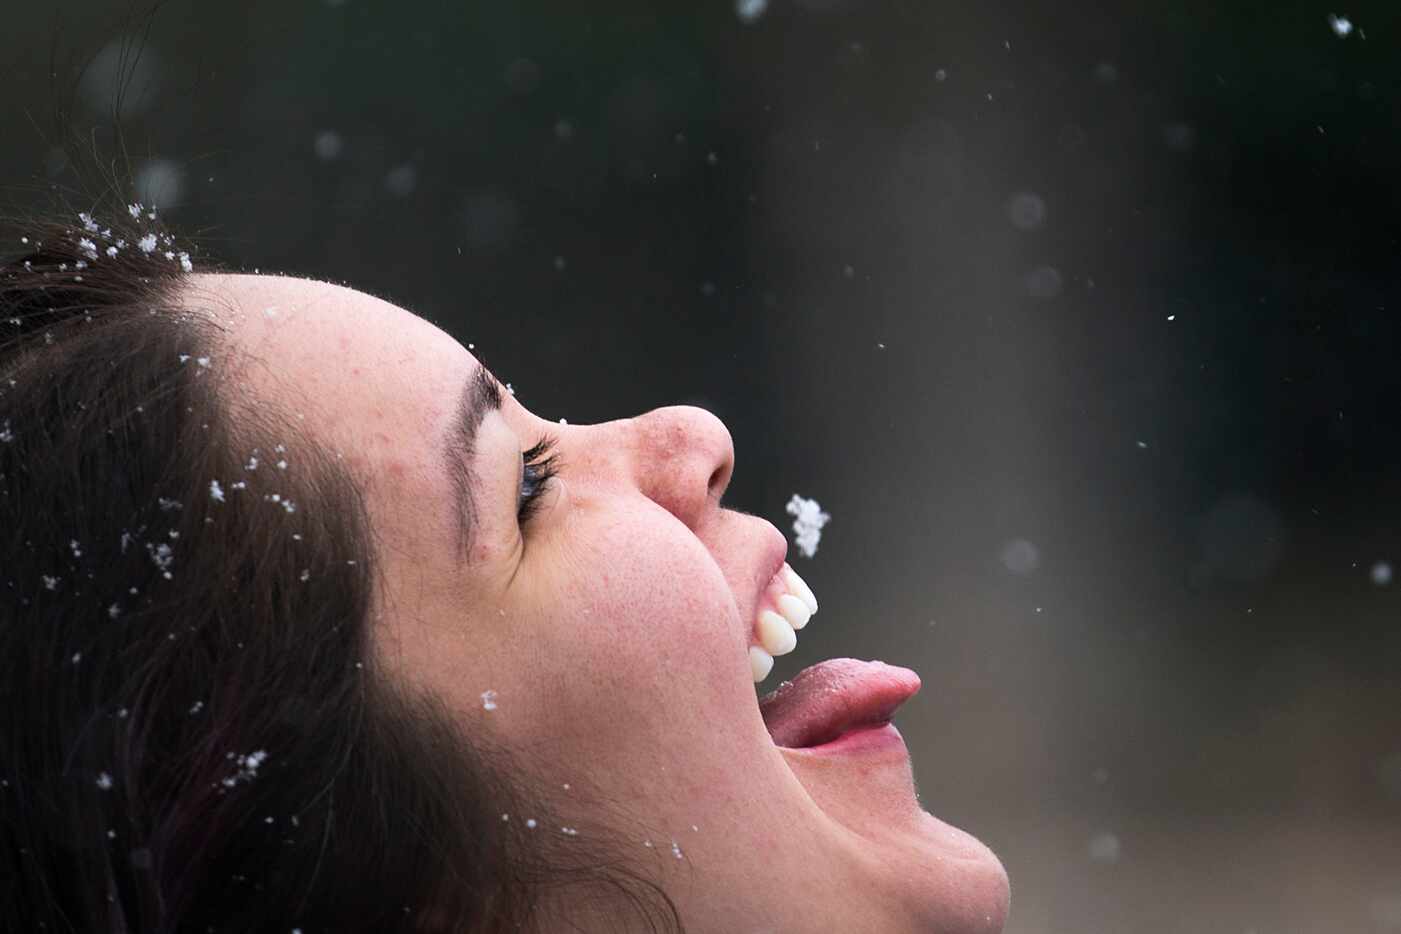 Racene Mendoza stepped outside her job at a bakery to try to catch snowflakes as snow fell...